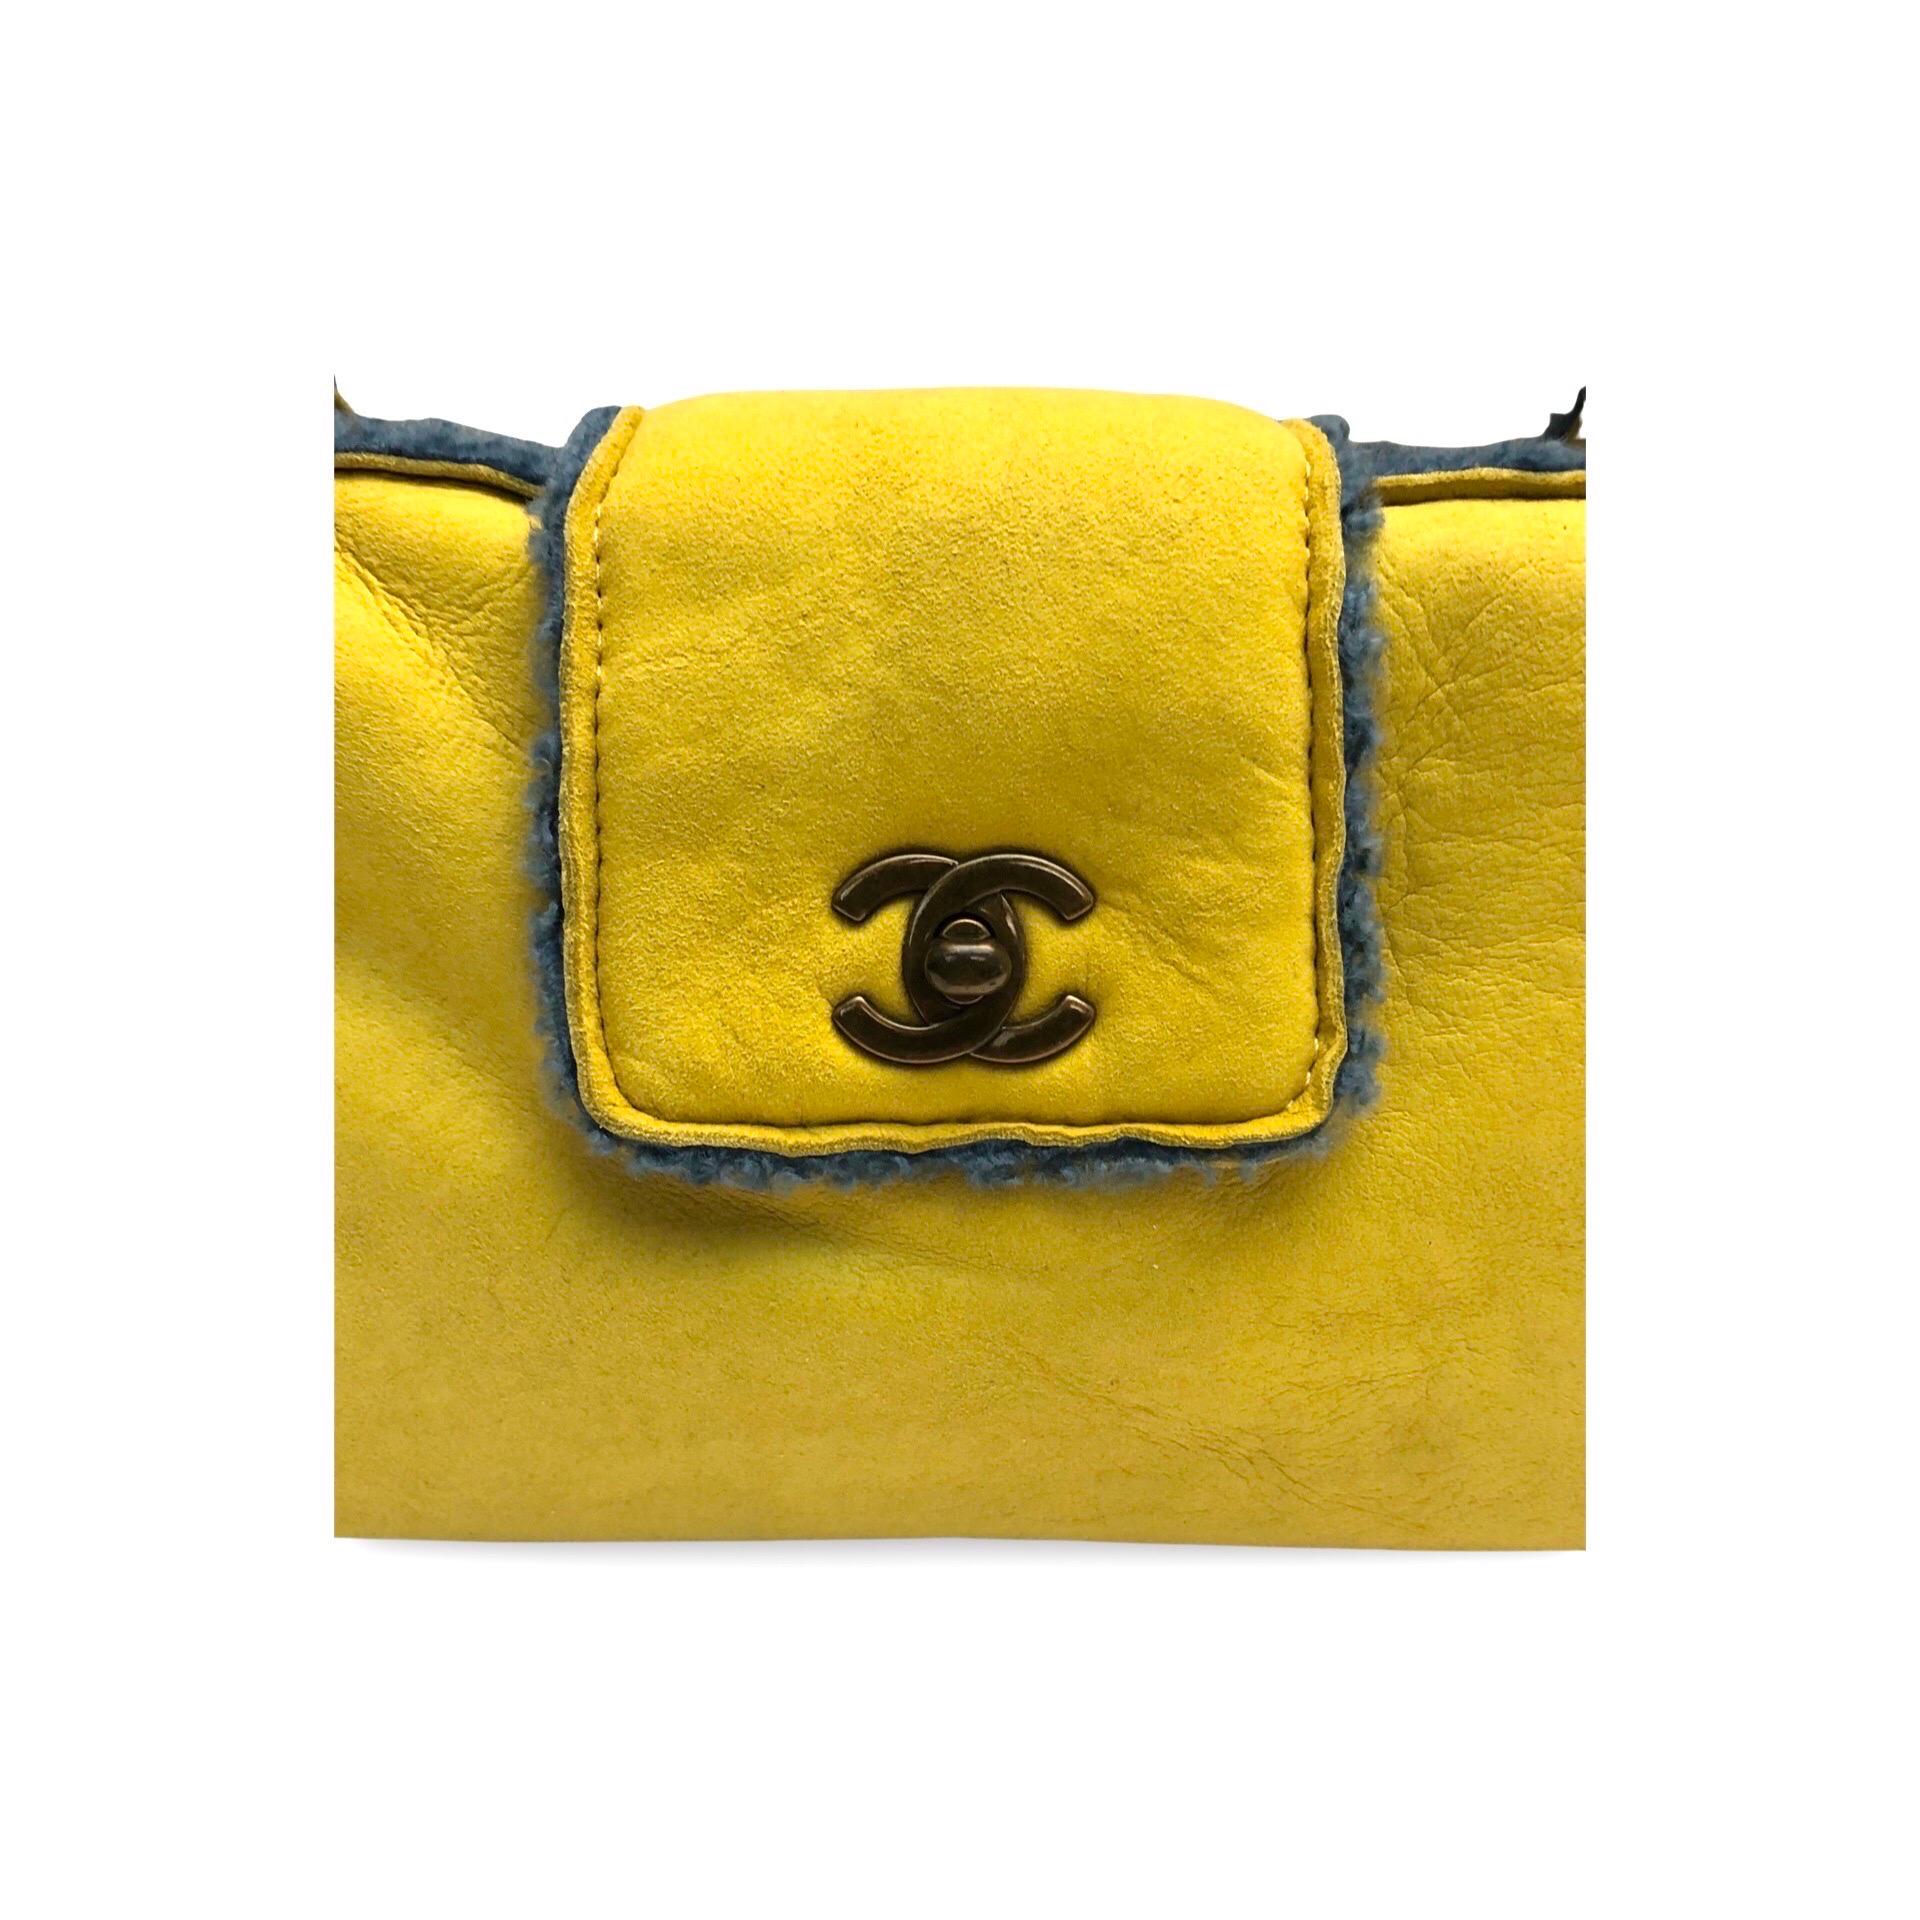 Chanel Yellow Suede Shearling Trim CC Turnlock Shoulder Handbag In Excellent Condition For Sale In Sheung Wan, HK